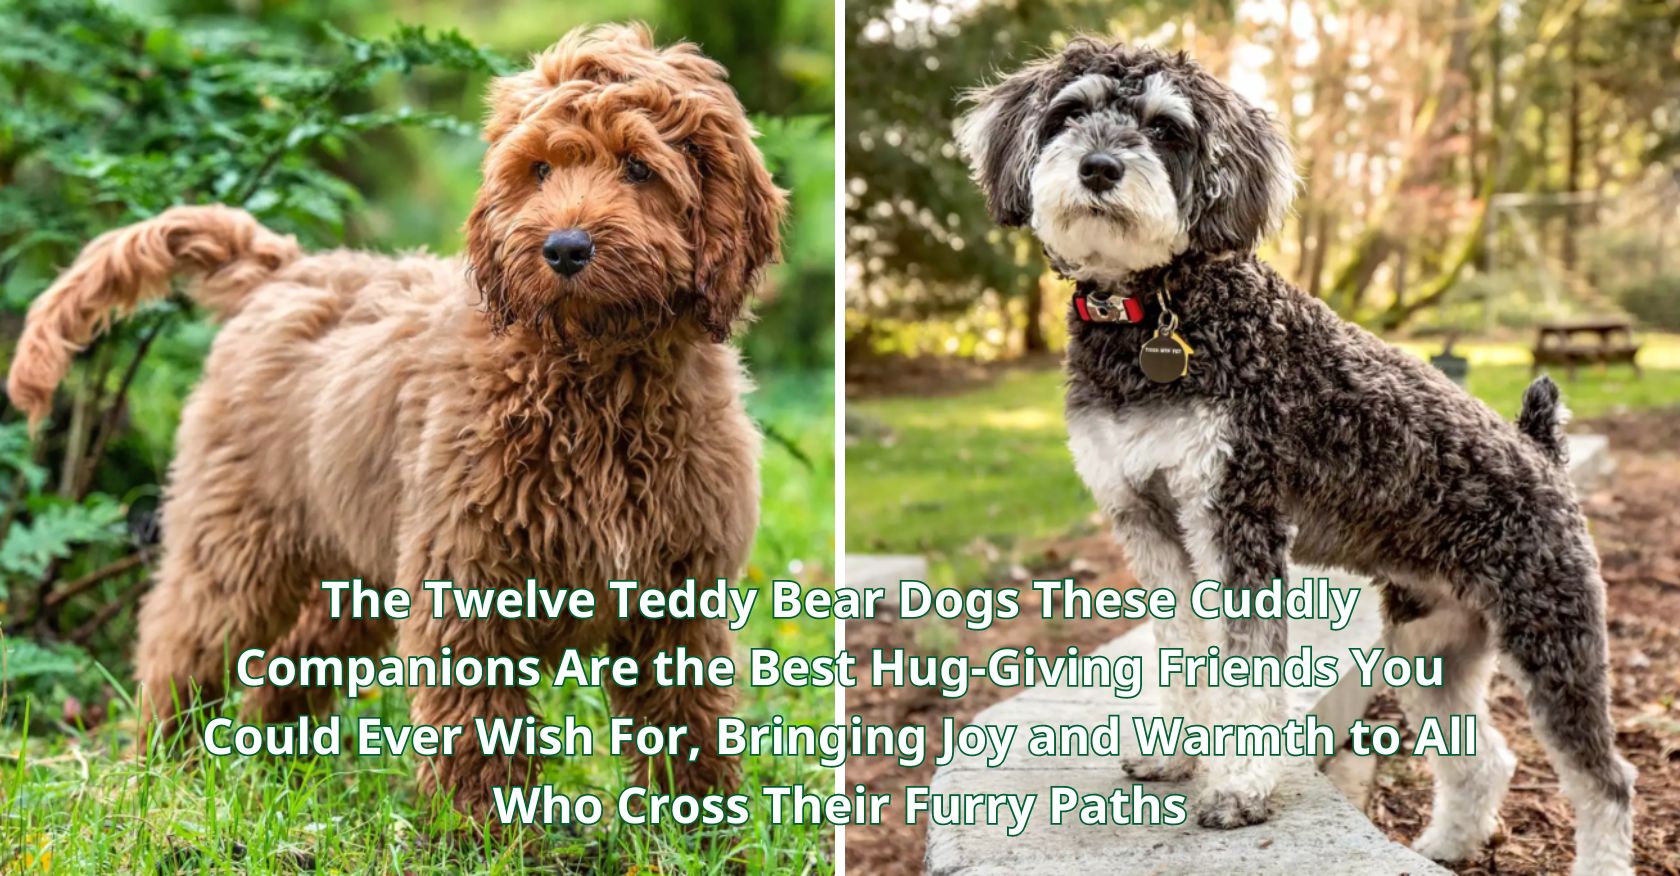 The Twelve Teddy Bear Dogs These Cuddly Companions Are the Best Hug-Giving Friends You Could Ever Wish For, Bringing Joy and Warmth to All Who Cross Their Furry Paths